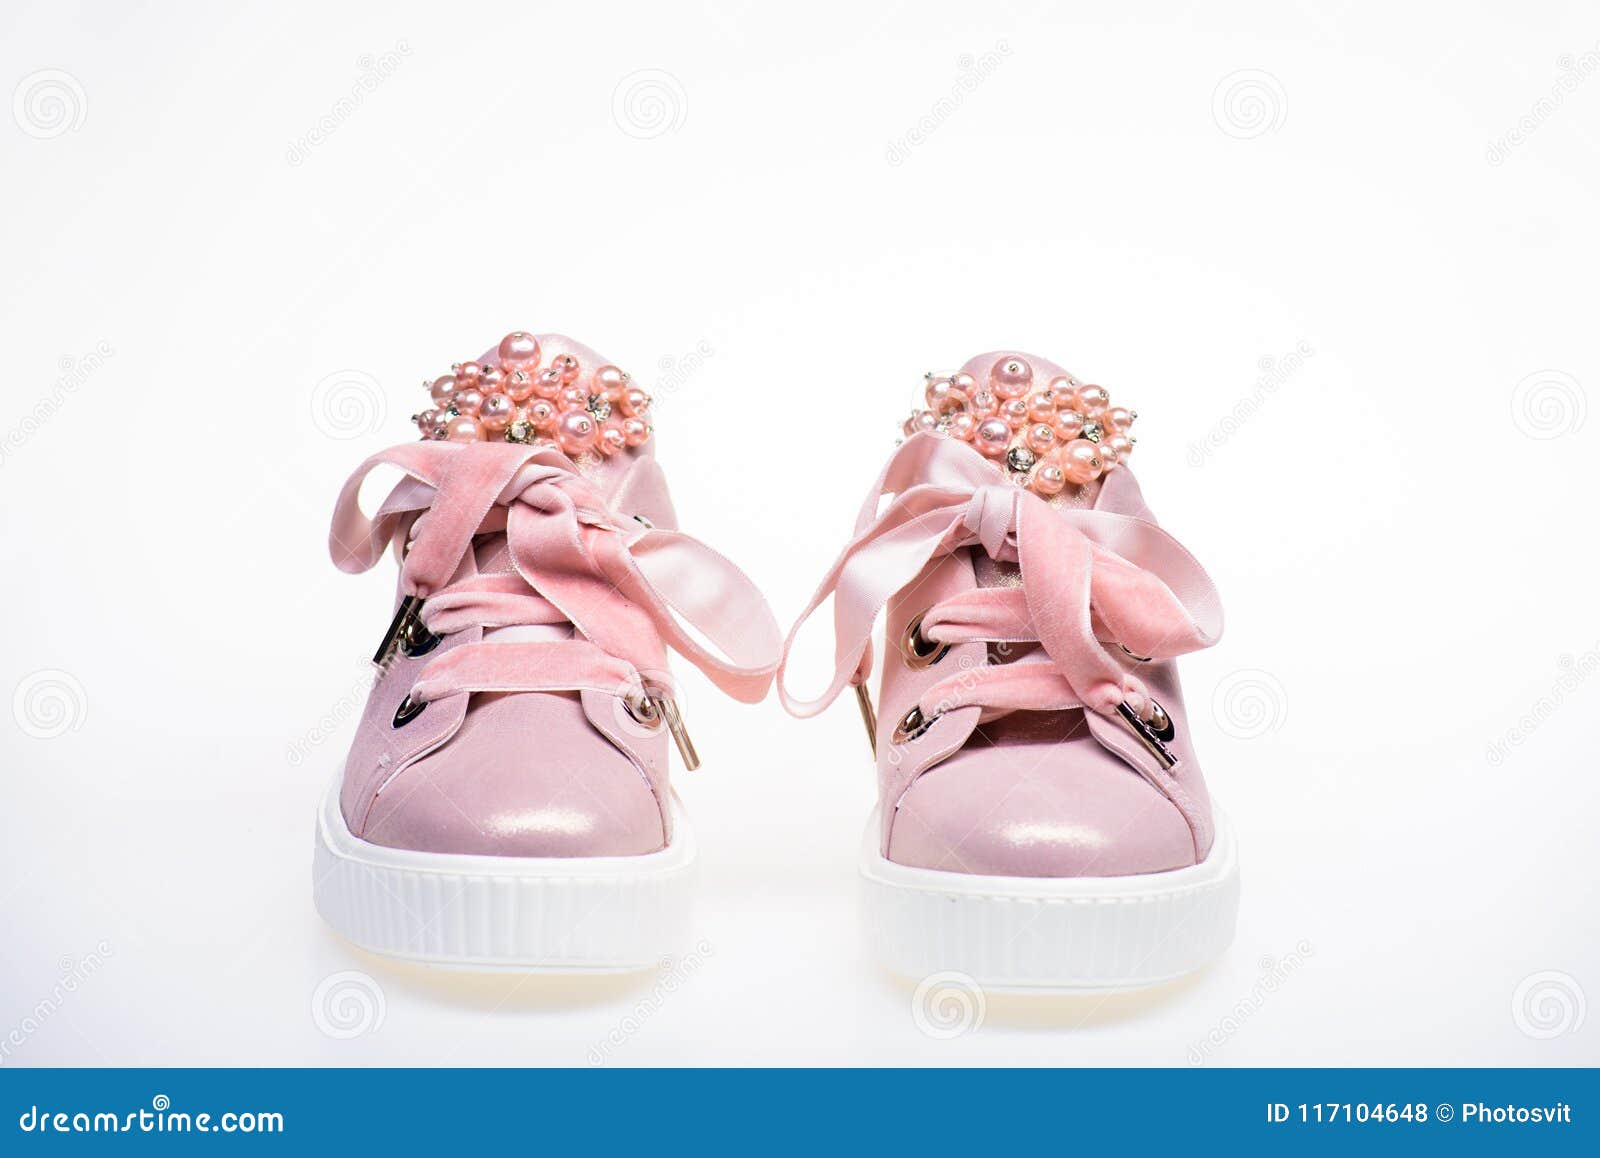 Glamorous Sneakers Concept. Cute Shoes Isolated on White Background ...